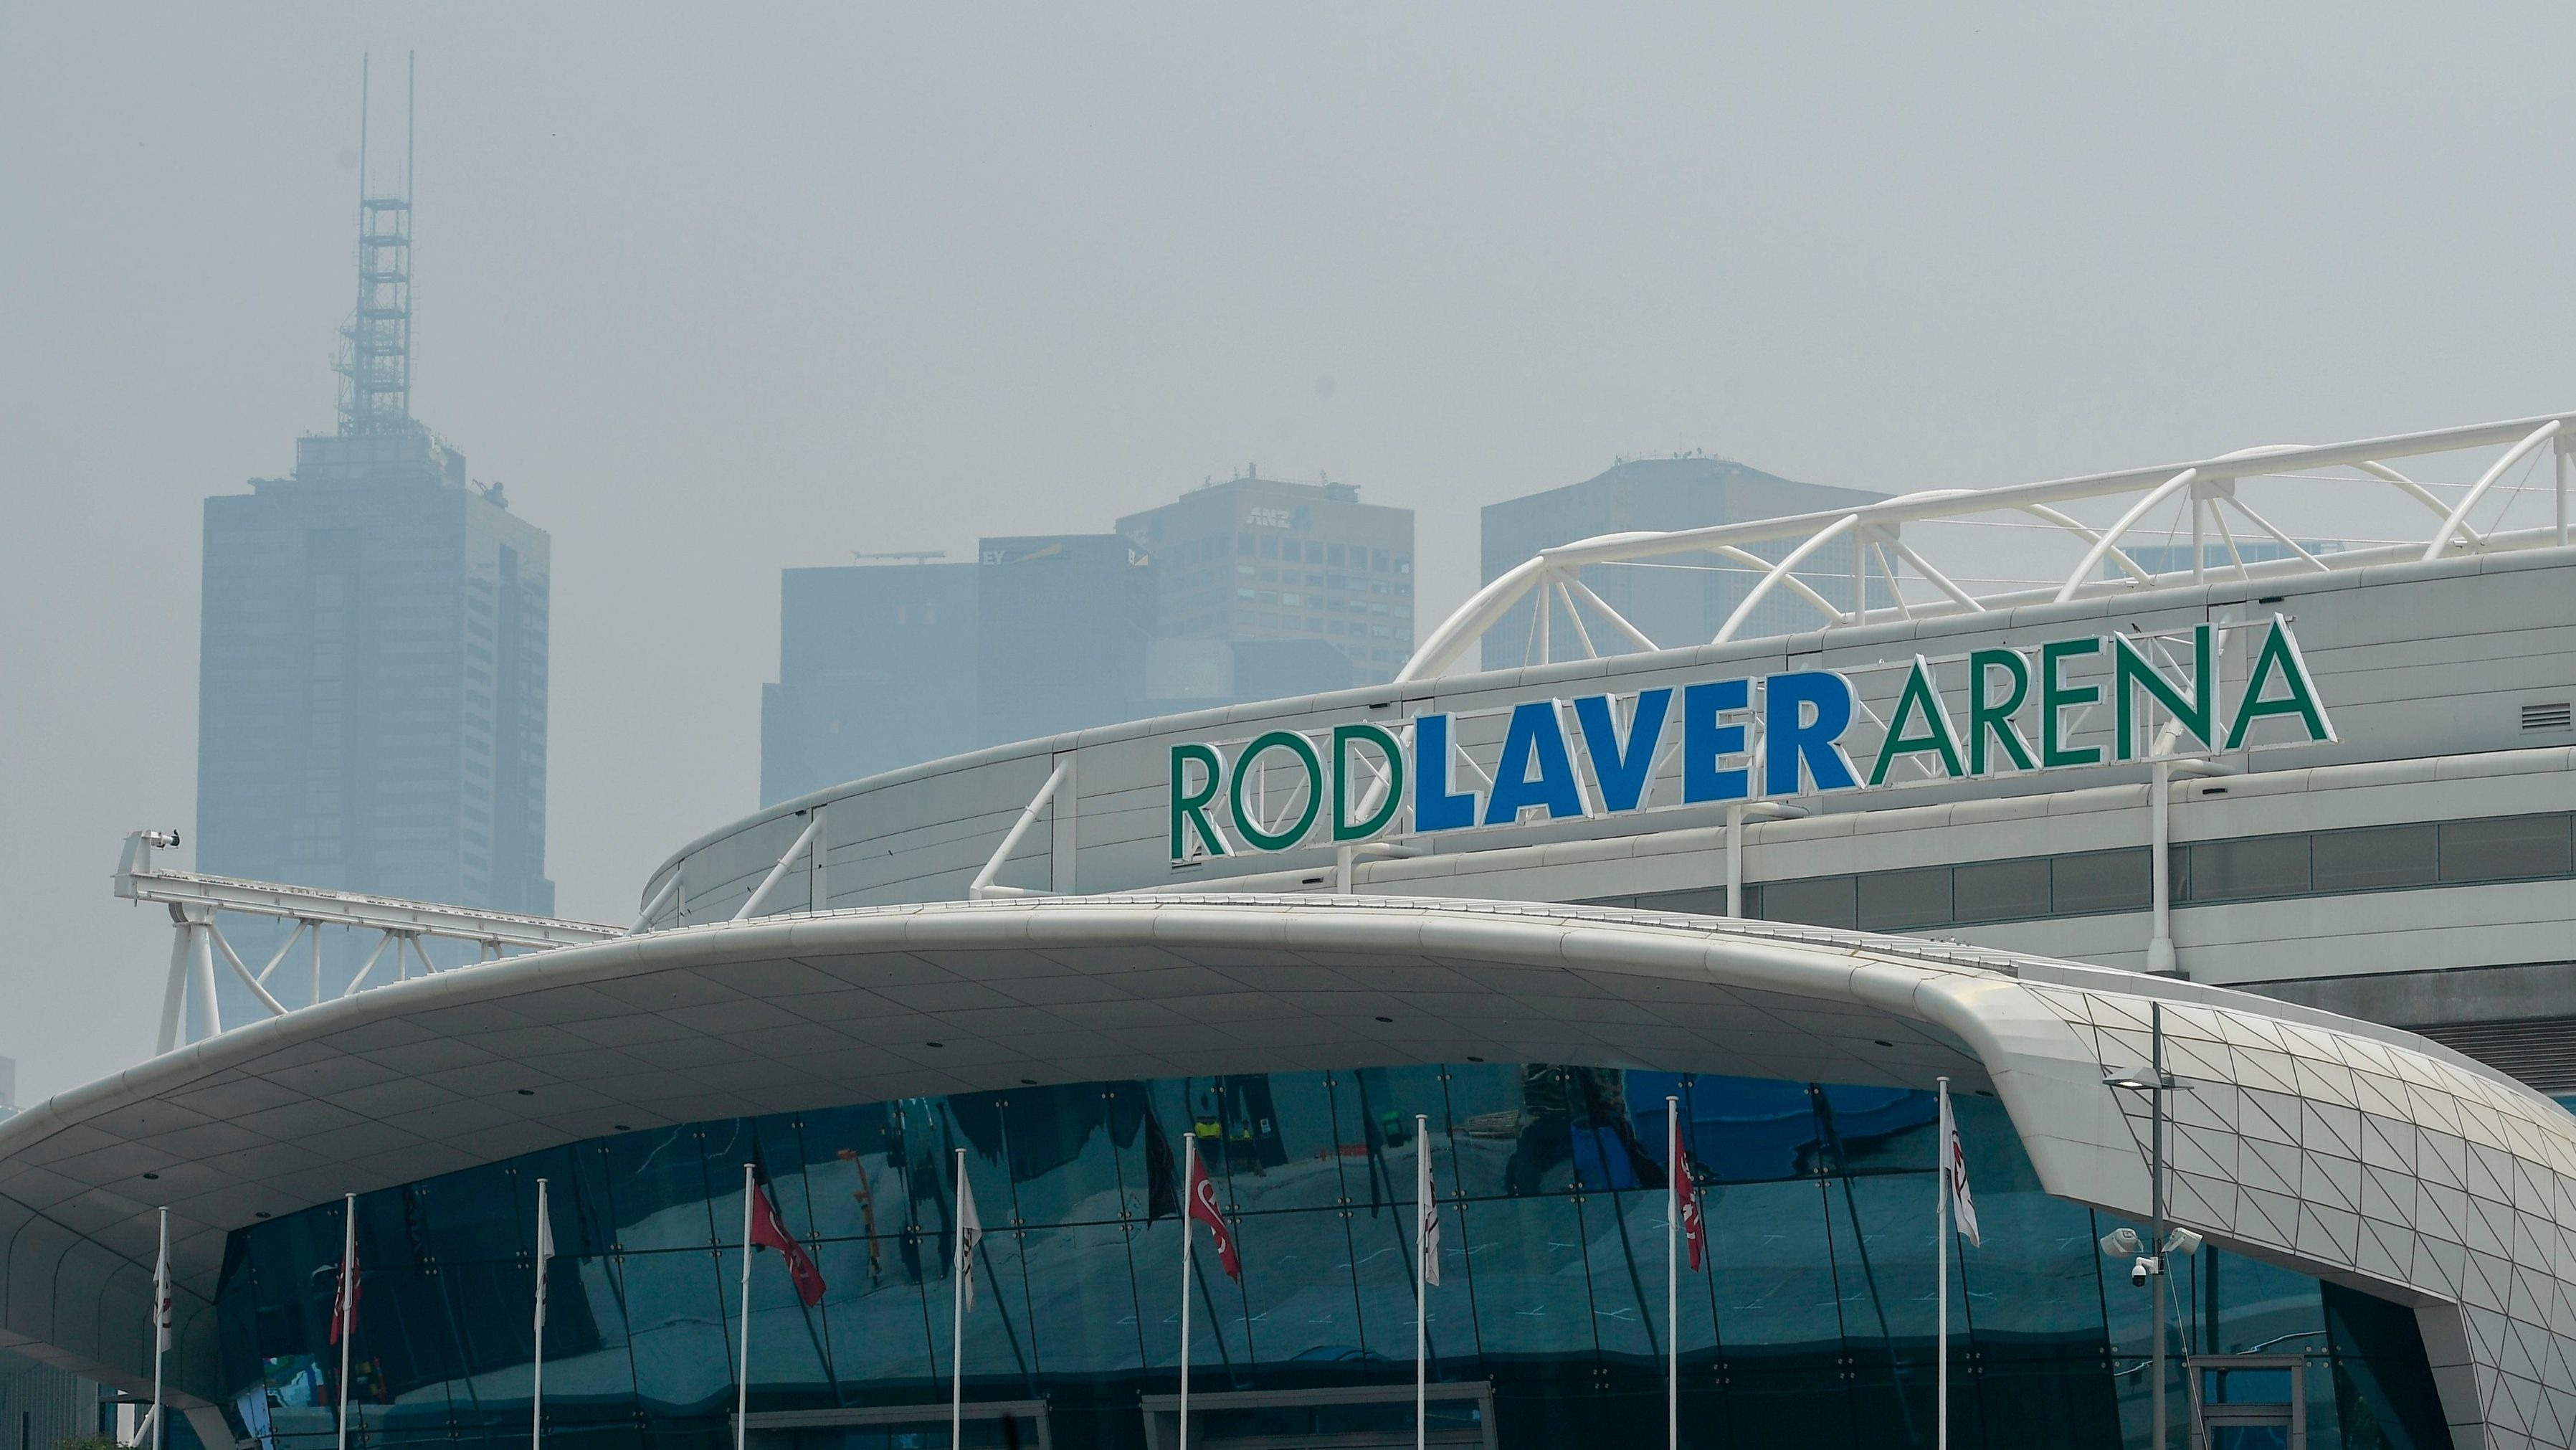 Smoke from the Australian bush fires hangs over the Rod Laver Arena in Melbourne Australian Open